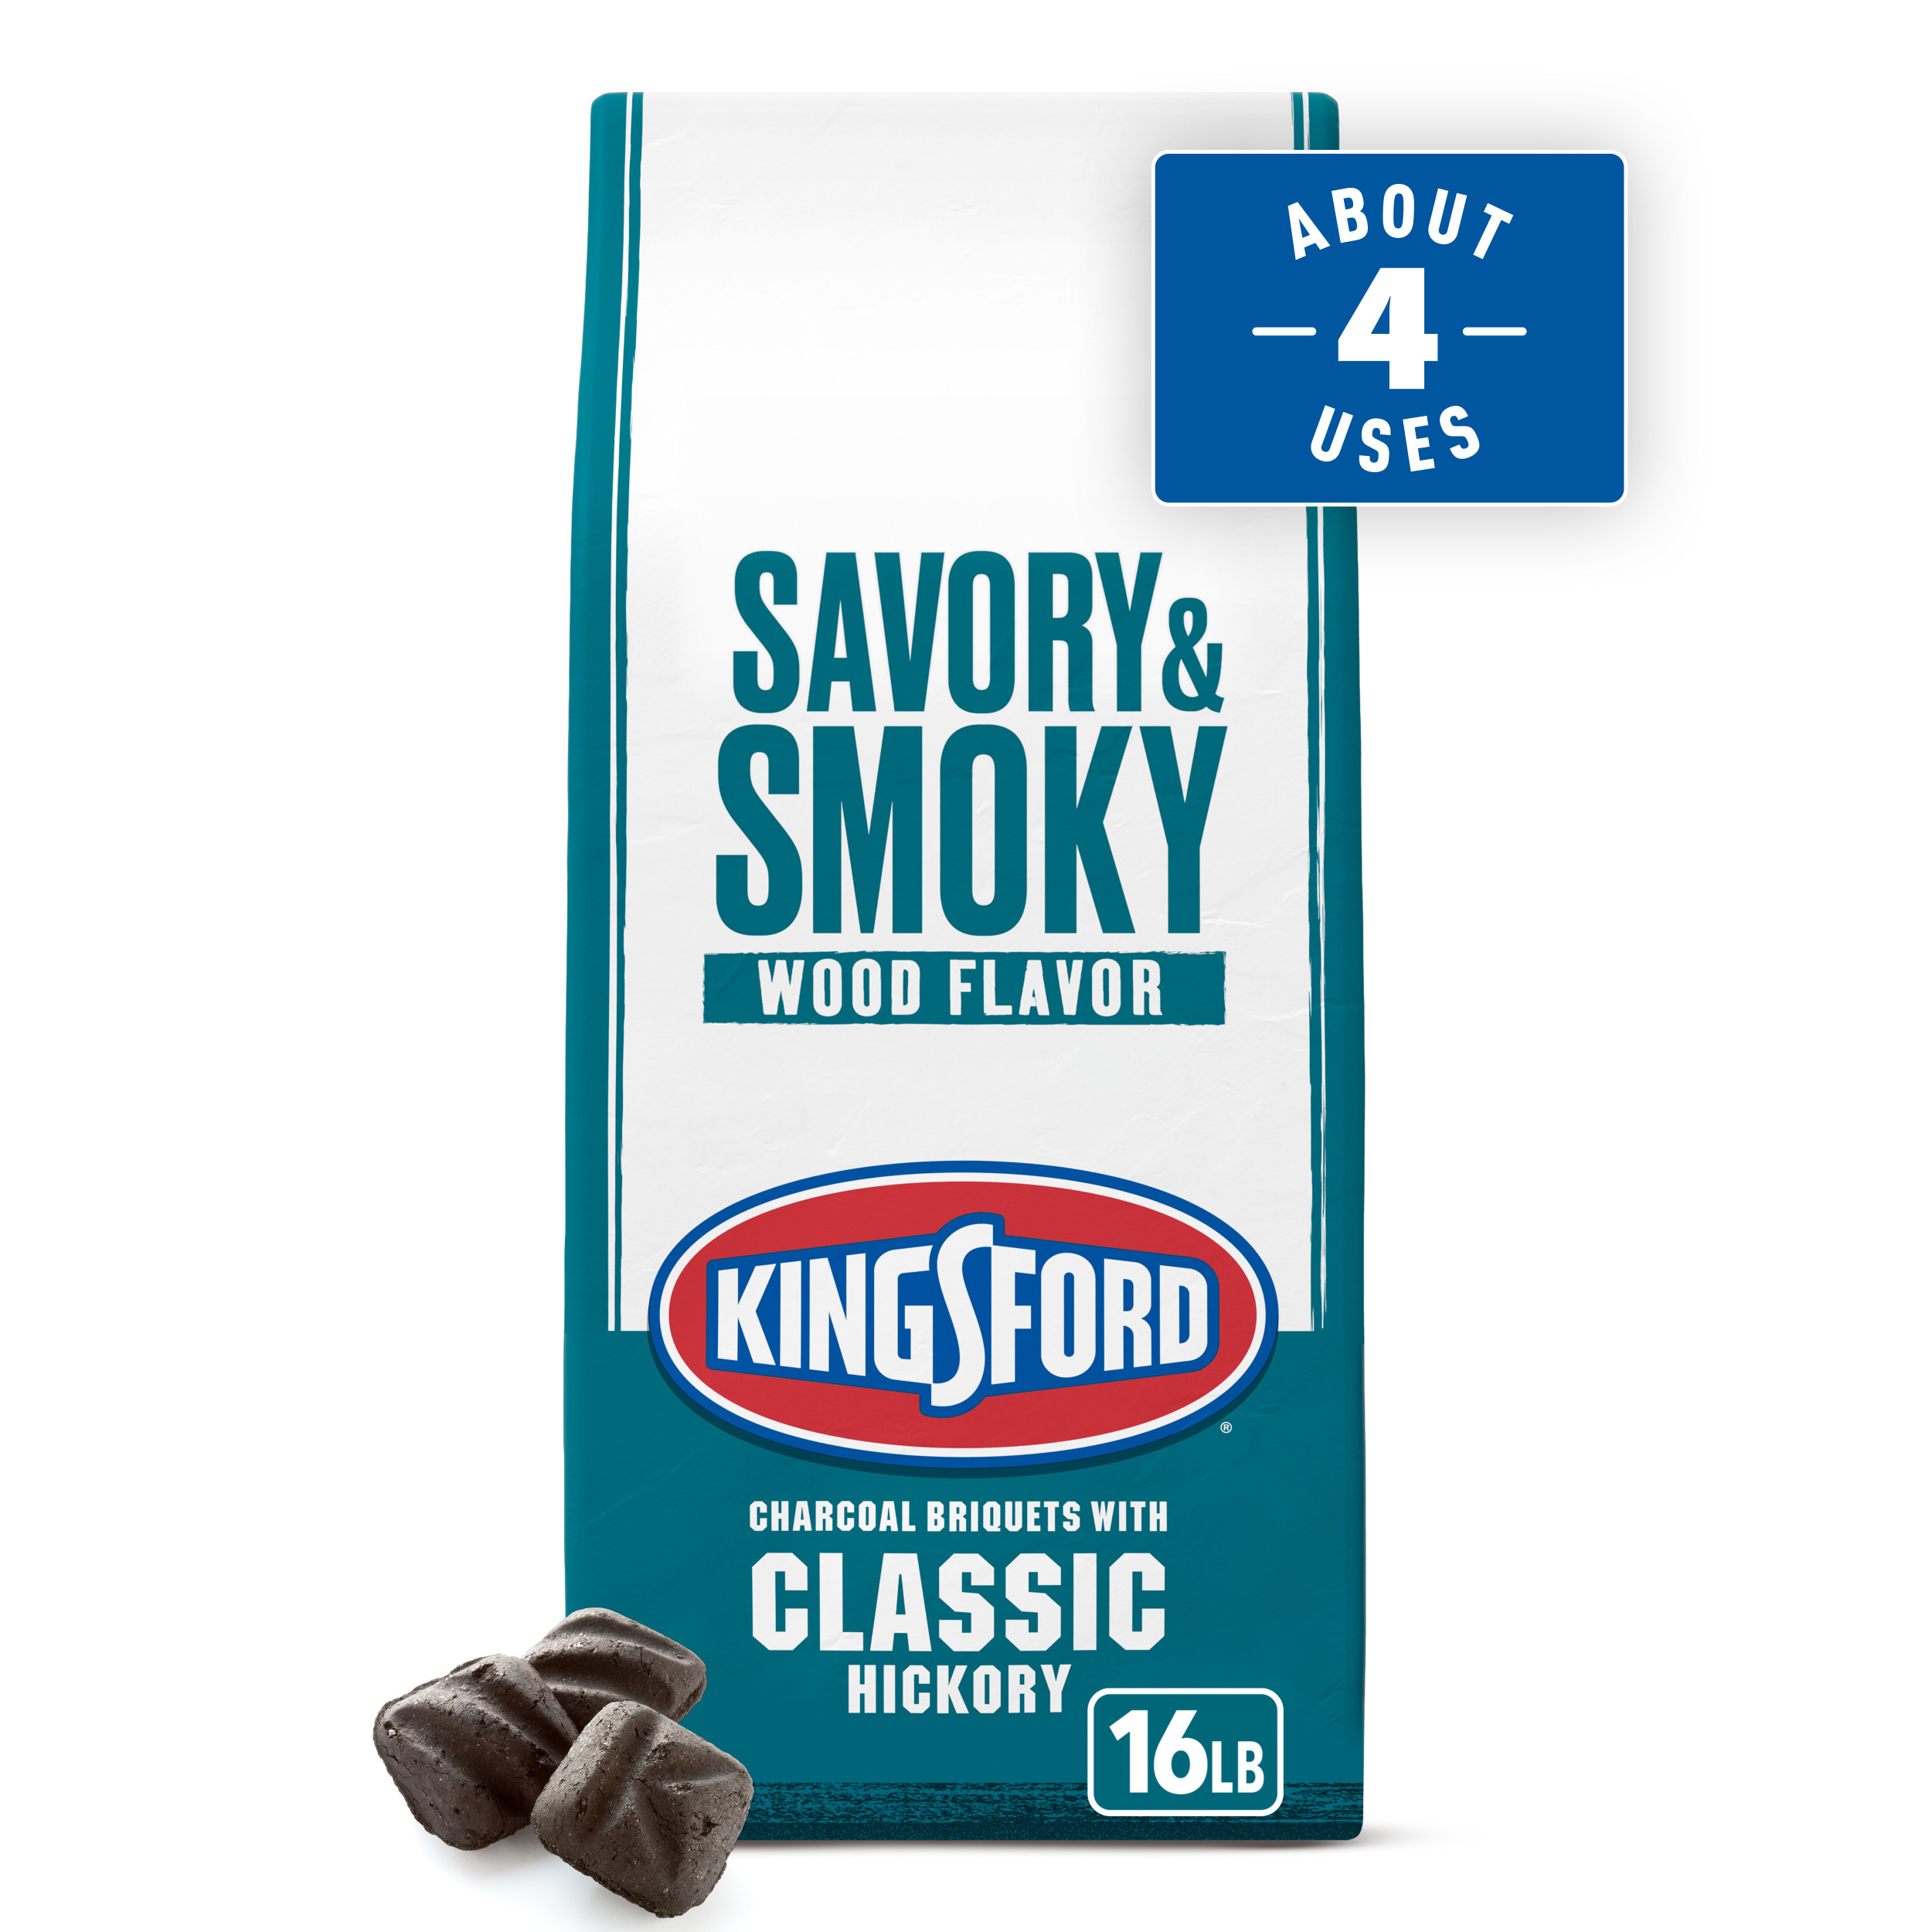 Kingsford Charcoal Briquettes with Classic Hickory, BBQ Charcoal for Grilling, 16 Pounds - image 1 of 16